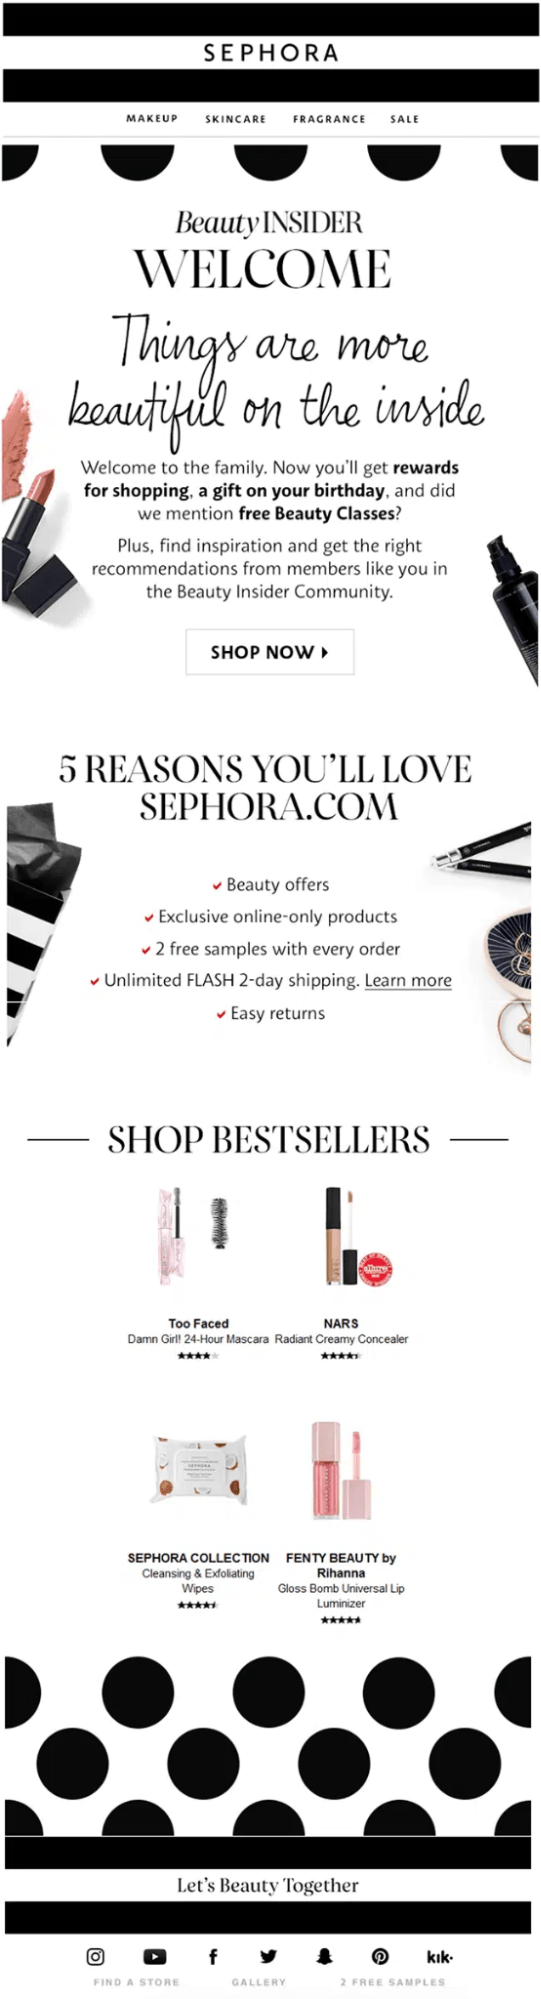 Dynamic email example: Sephora